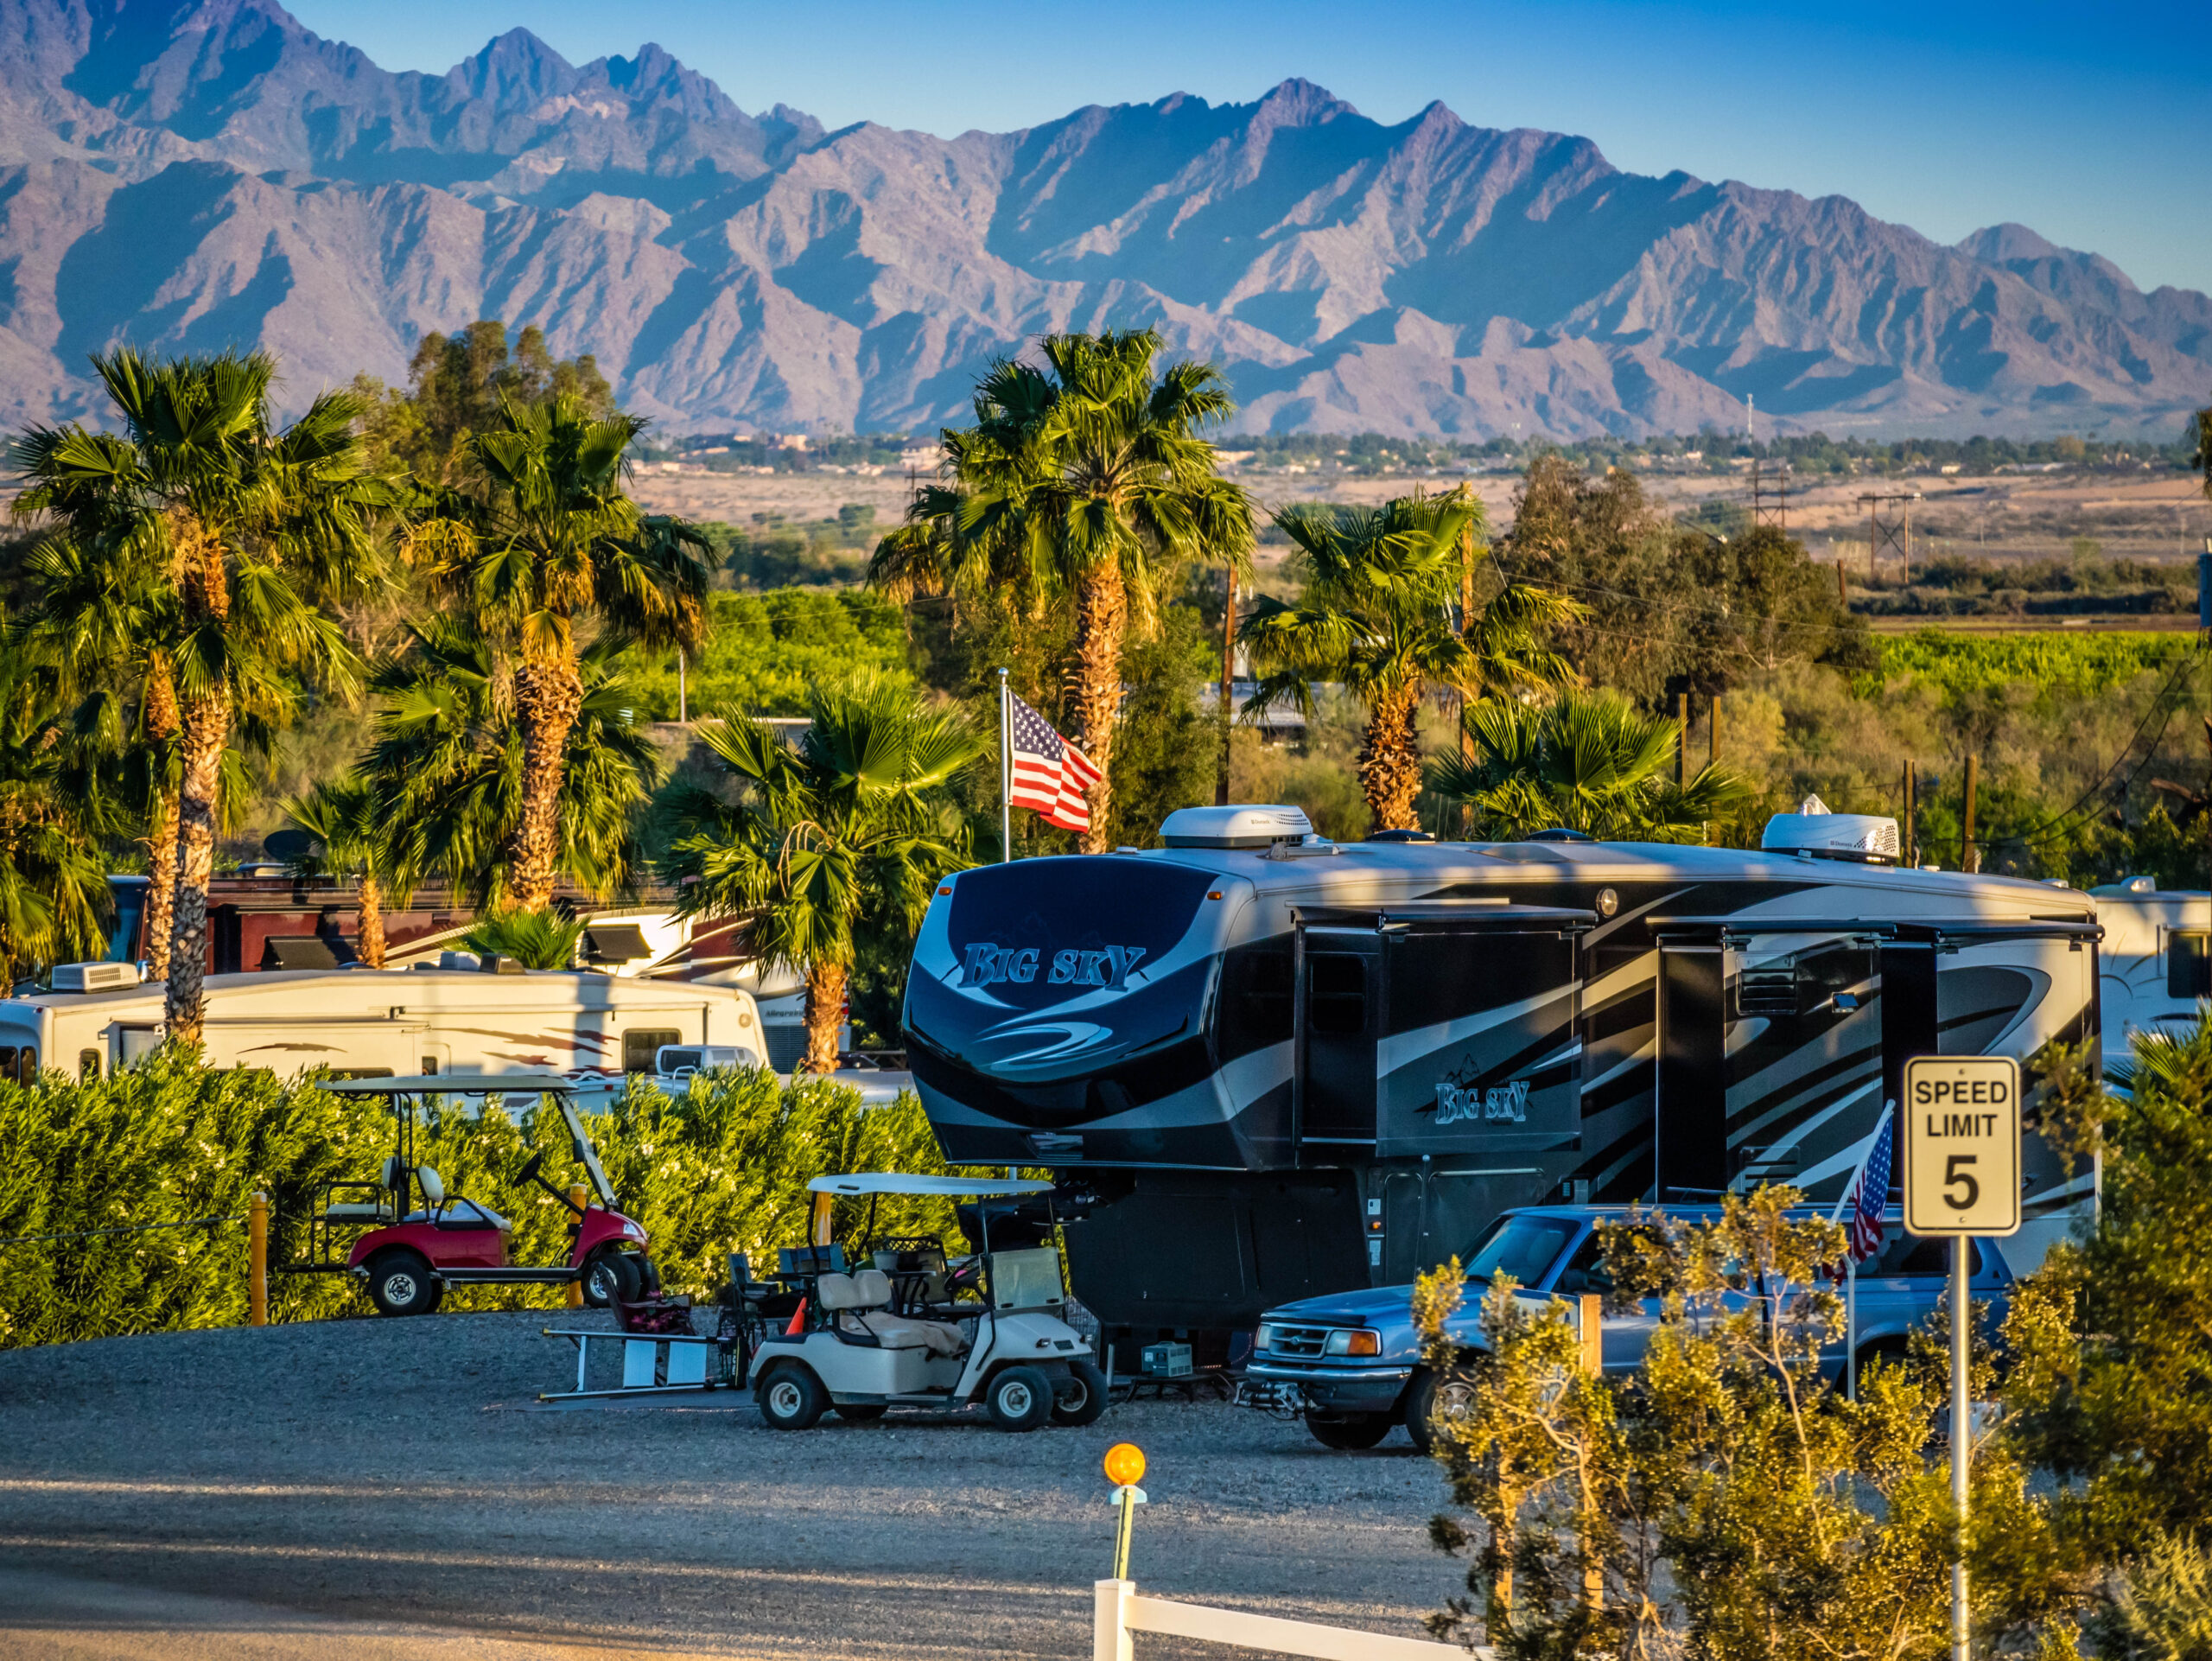 campground facilities for long-term guests